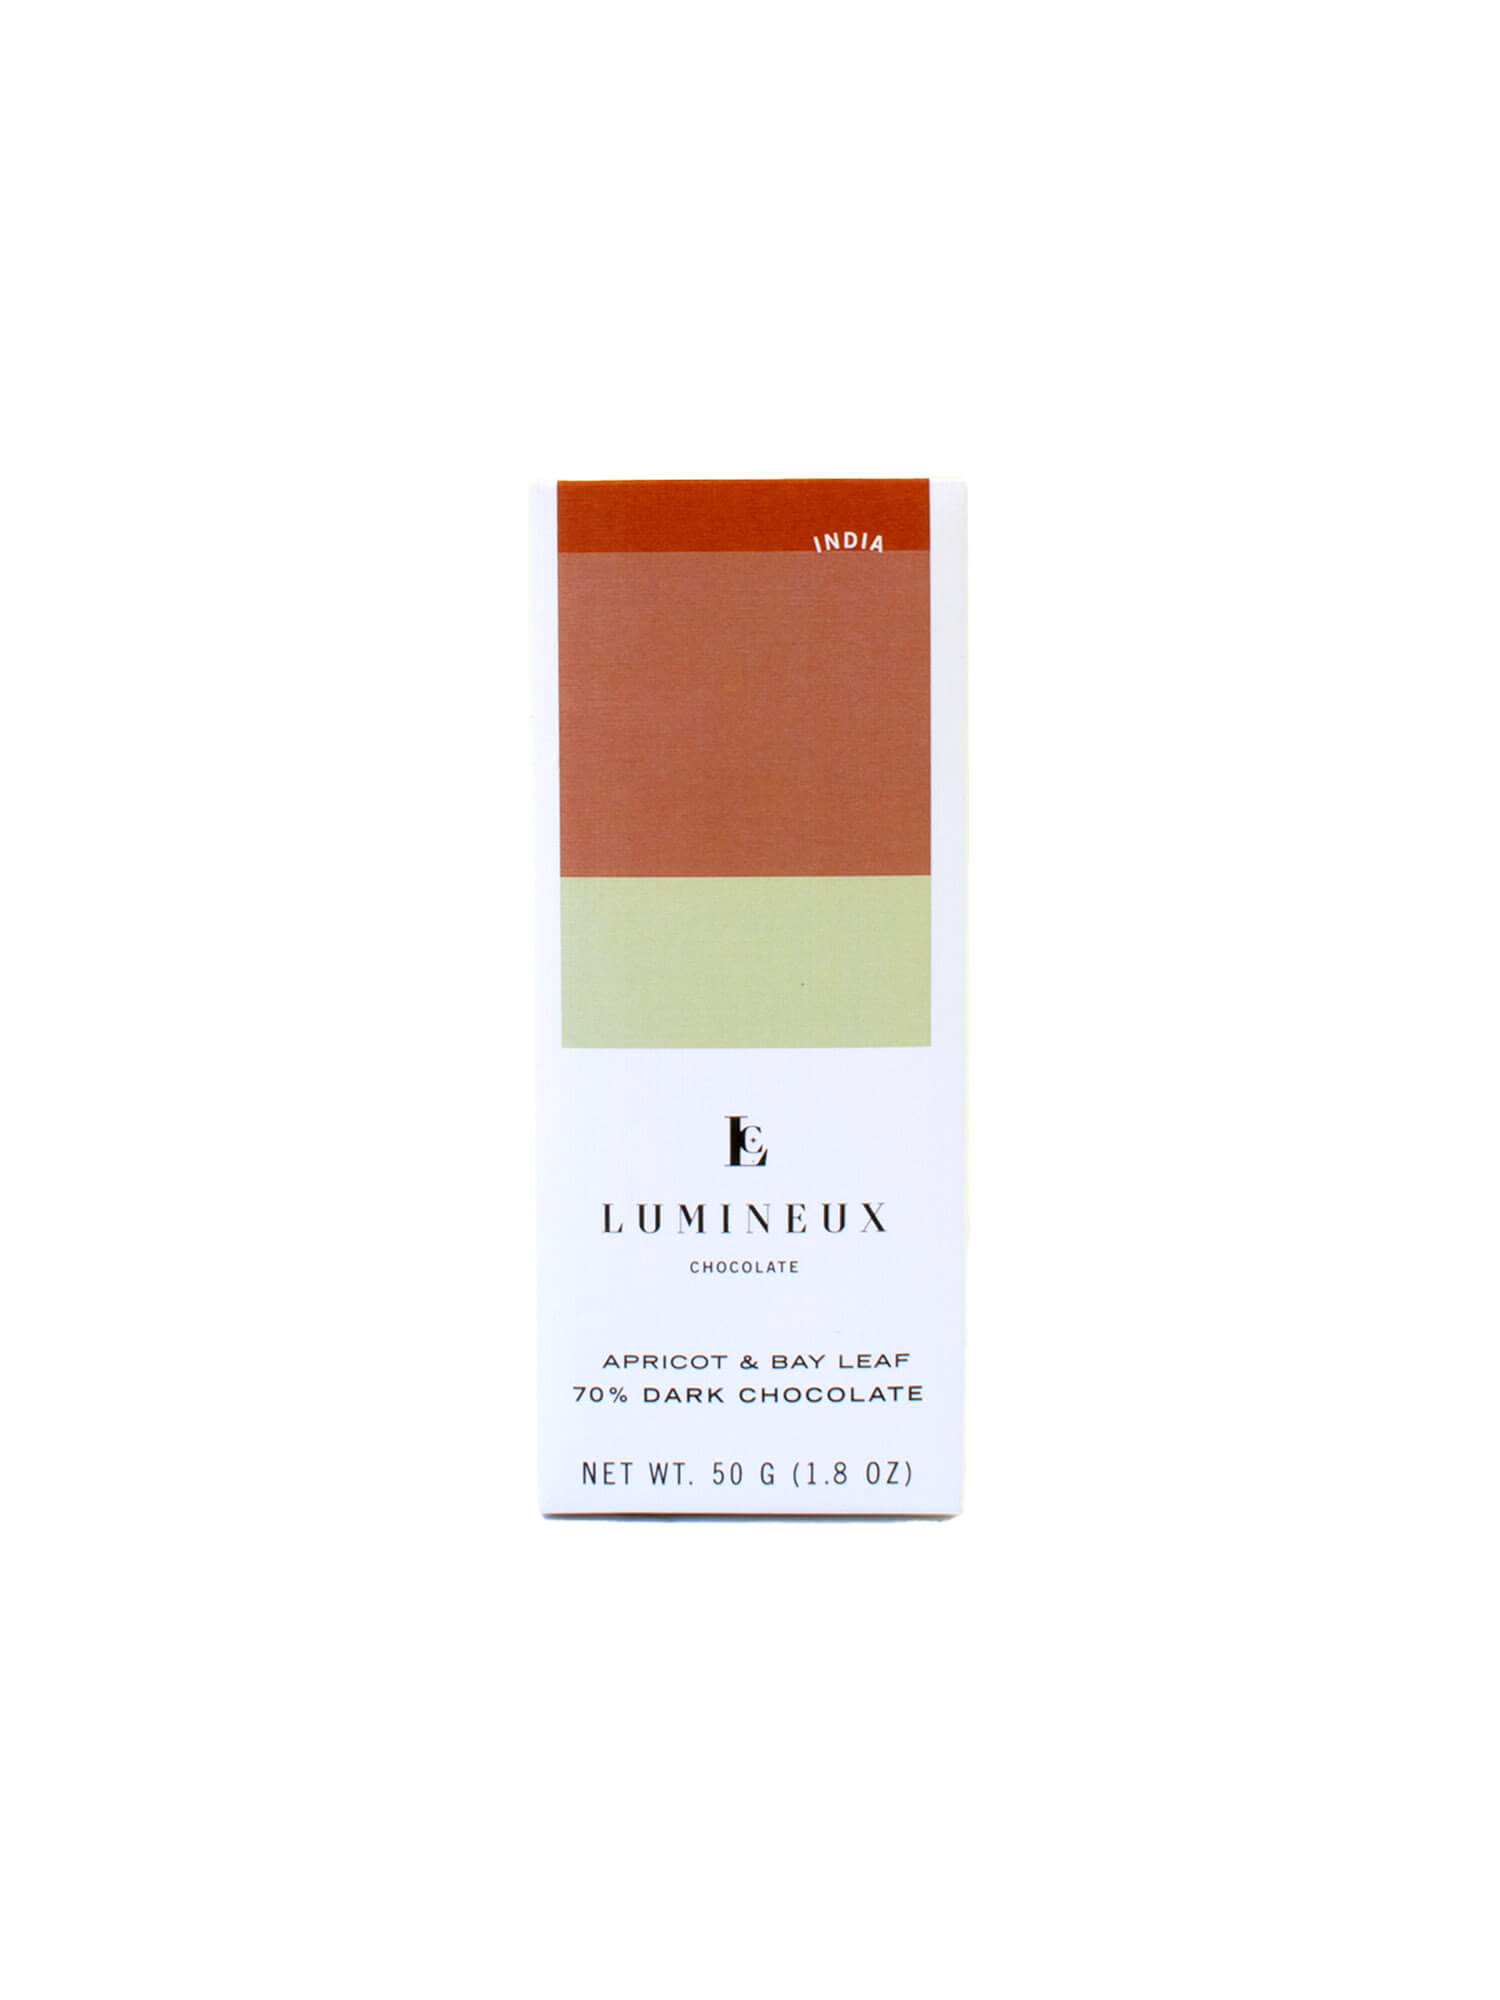 70% India Apricot & Bay Leaf Dark Chocolate Tablet - Lumineux - Mitzie Mee Shop